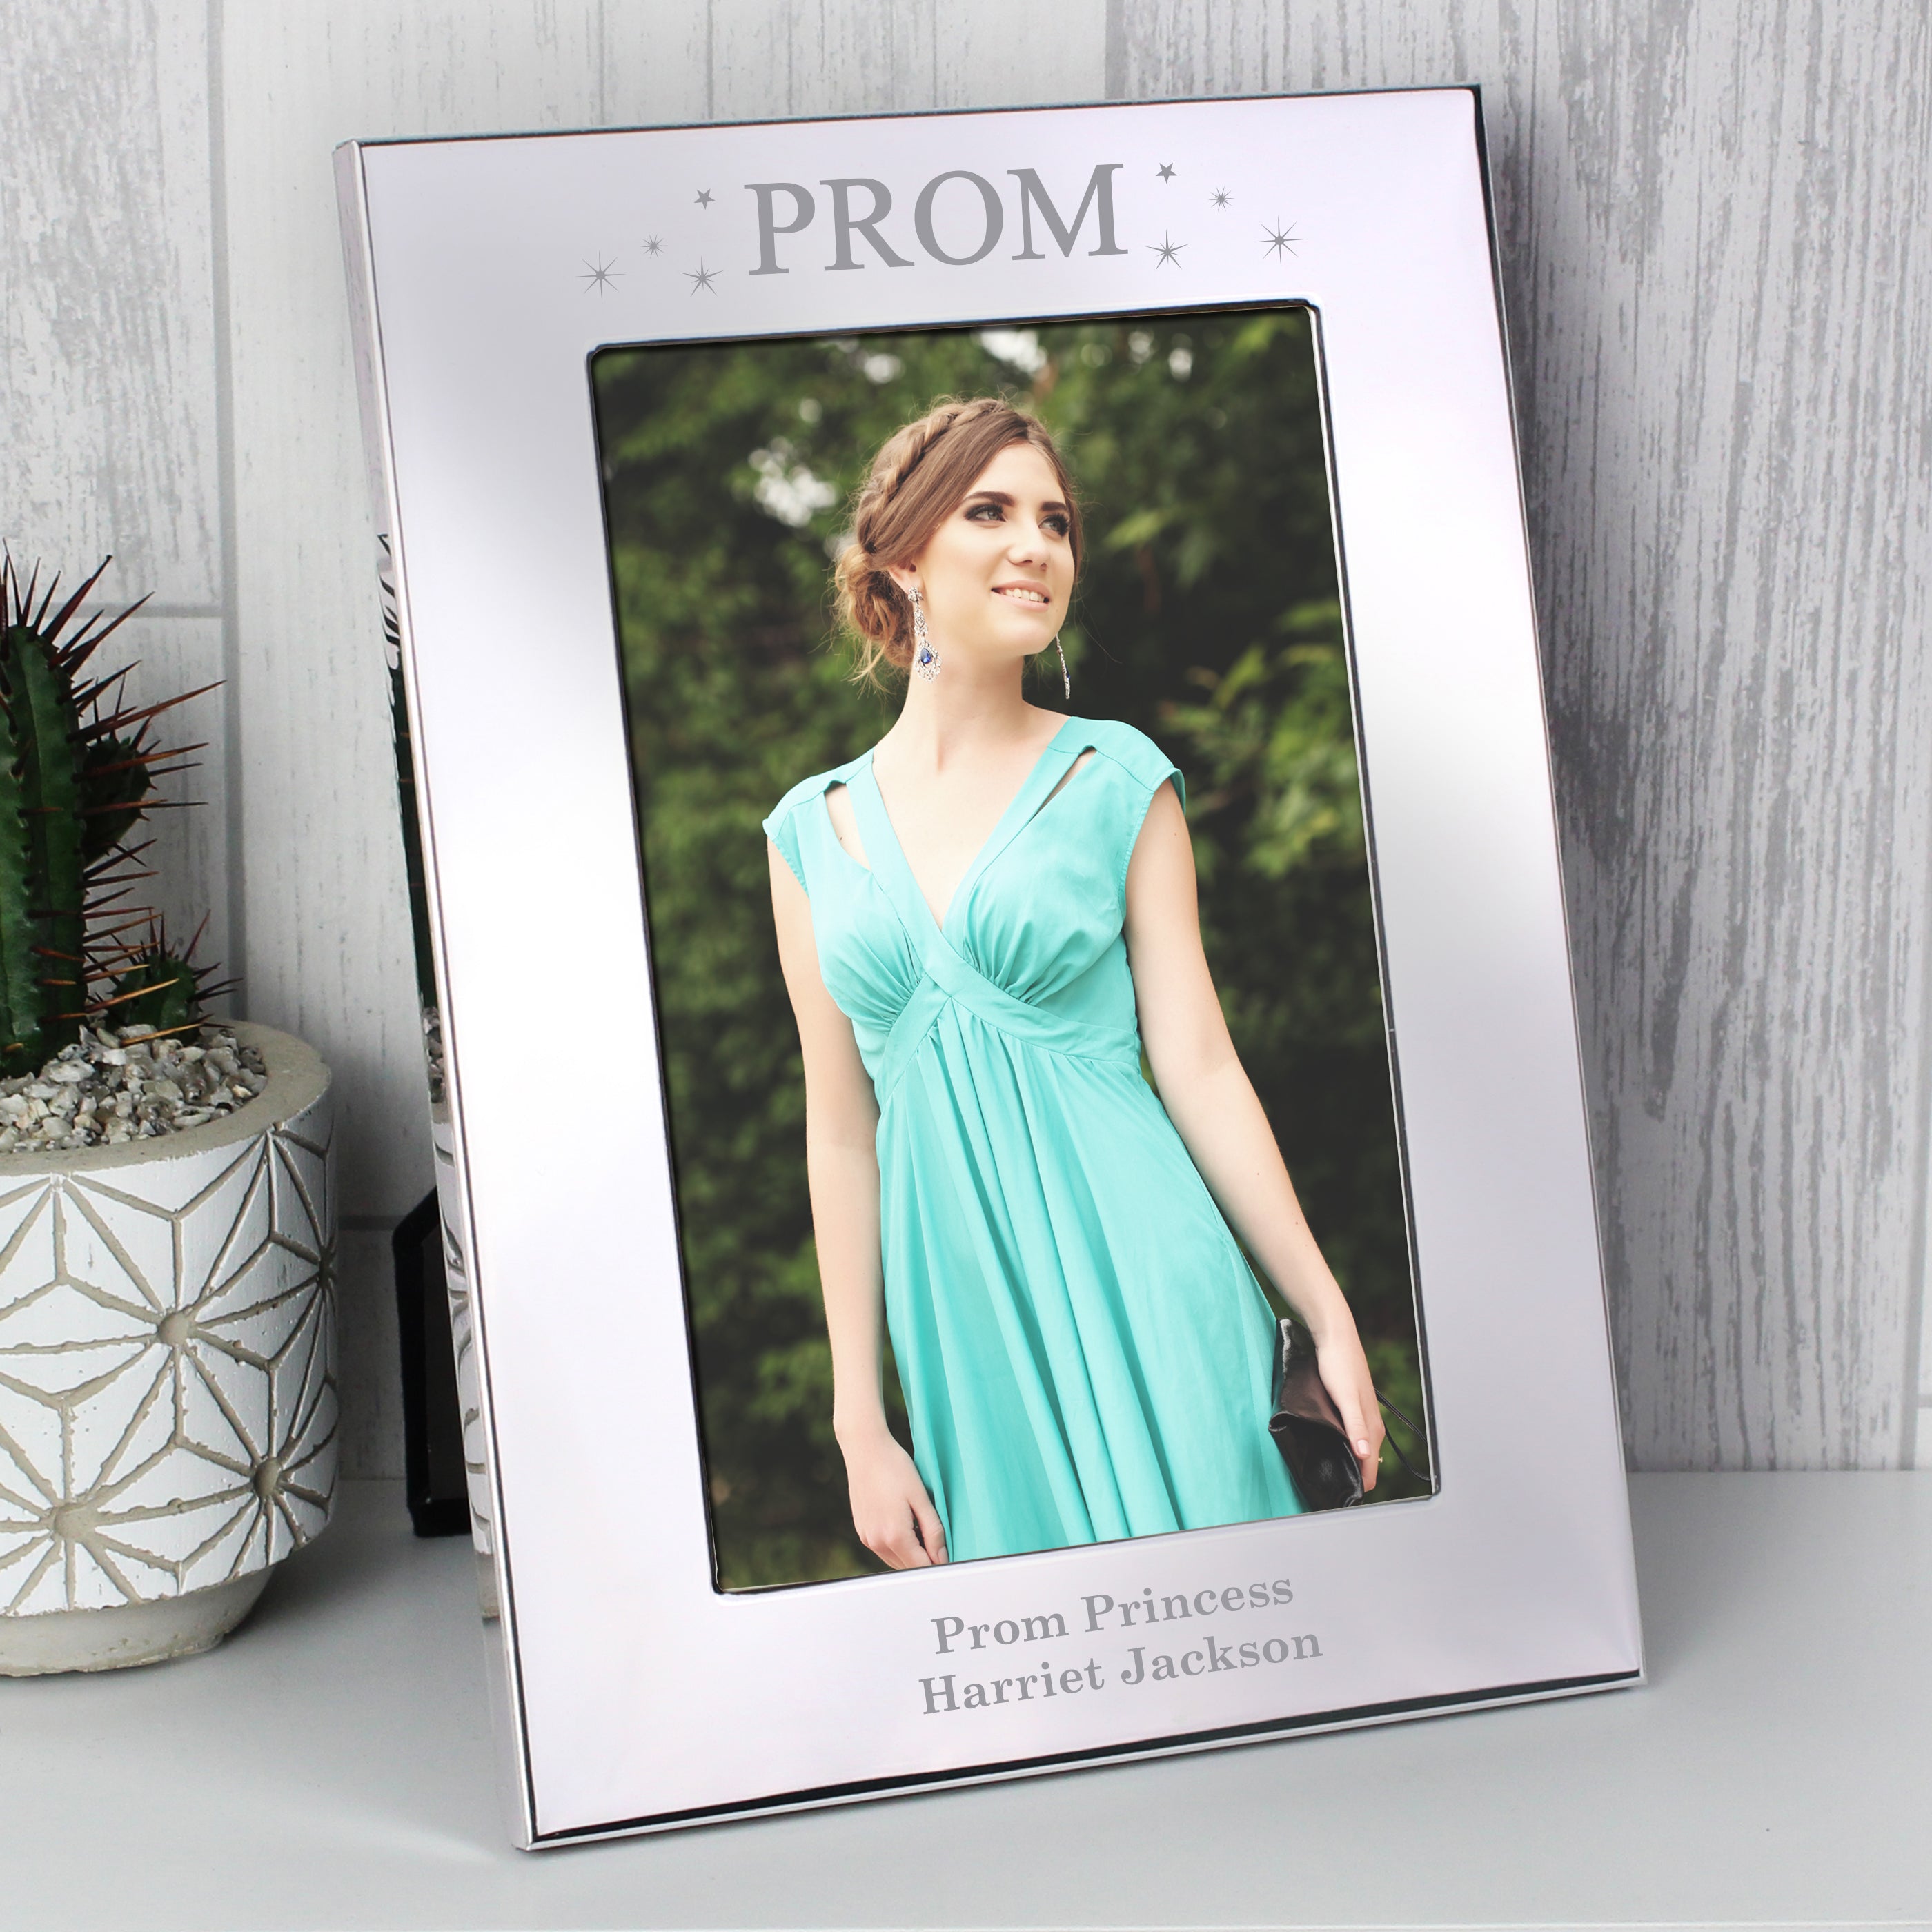 Personalised Prom Night 4x6 Silver Photo Frame